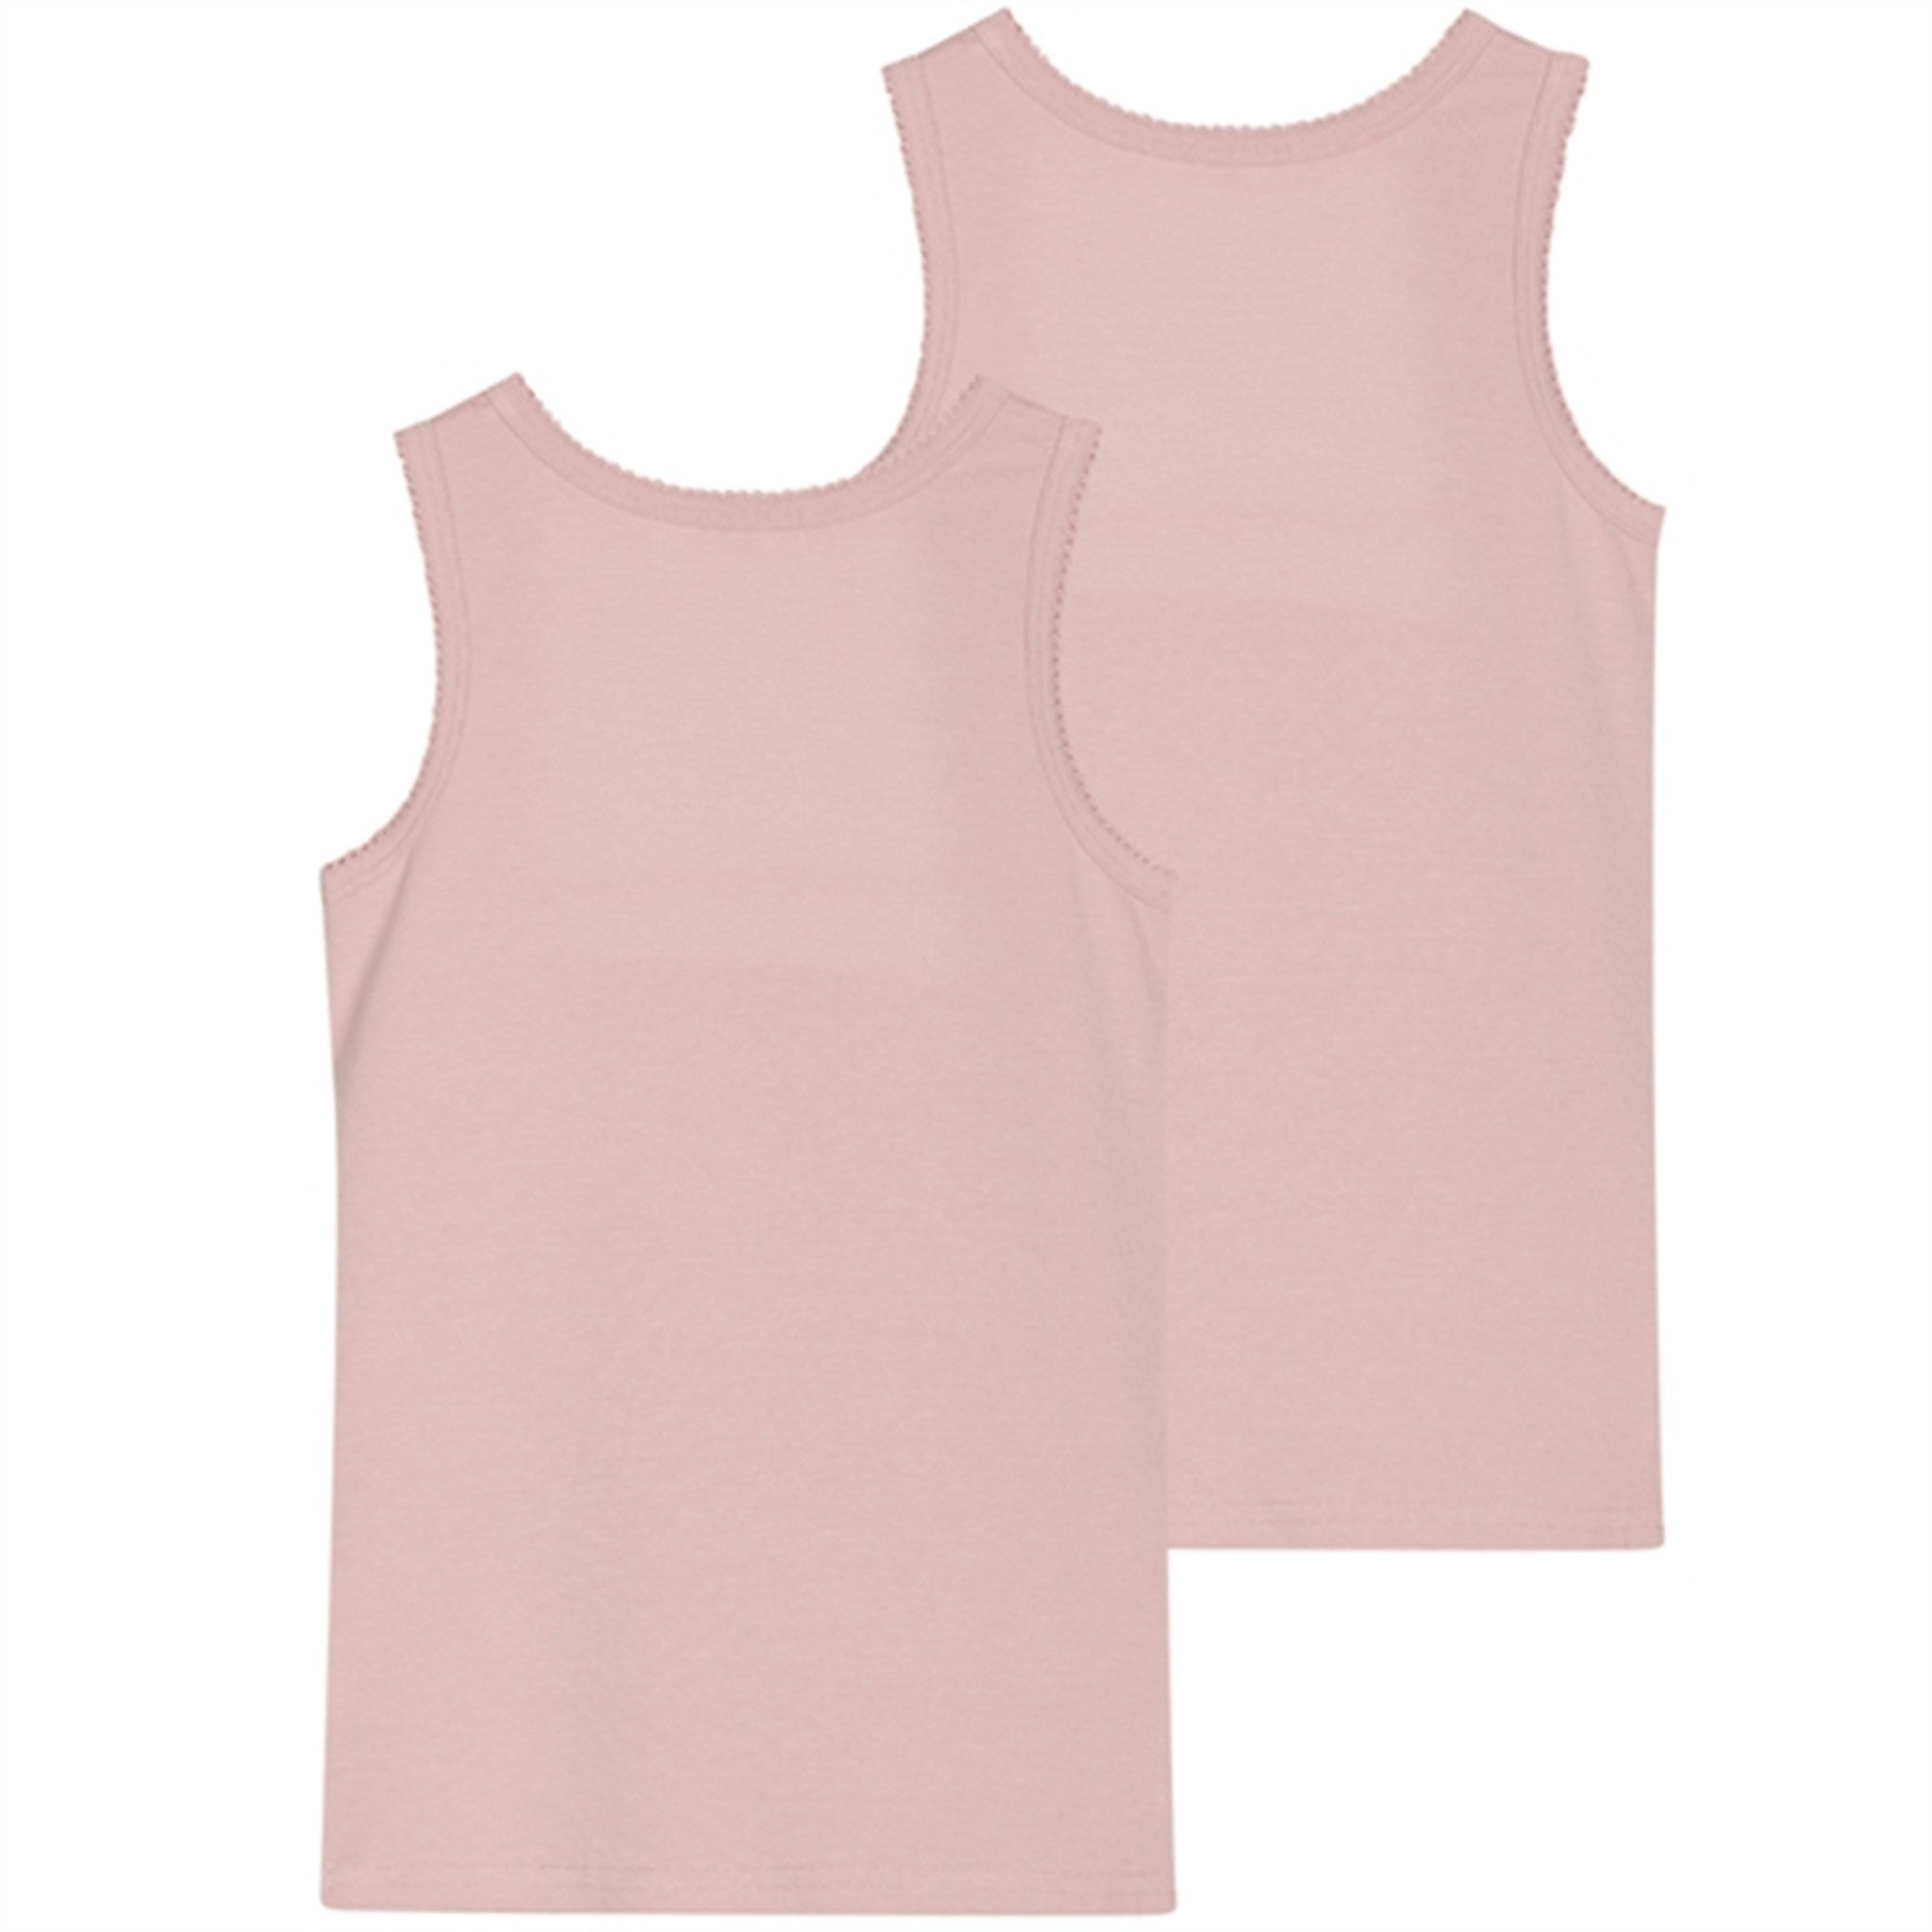 Hust & Claire Dusty Rose Flicka Tank Top 2-pak 2